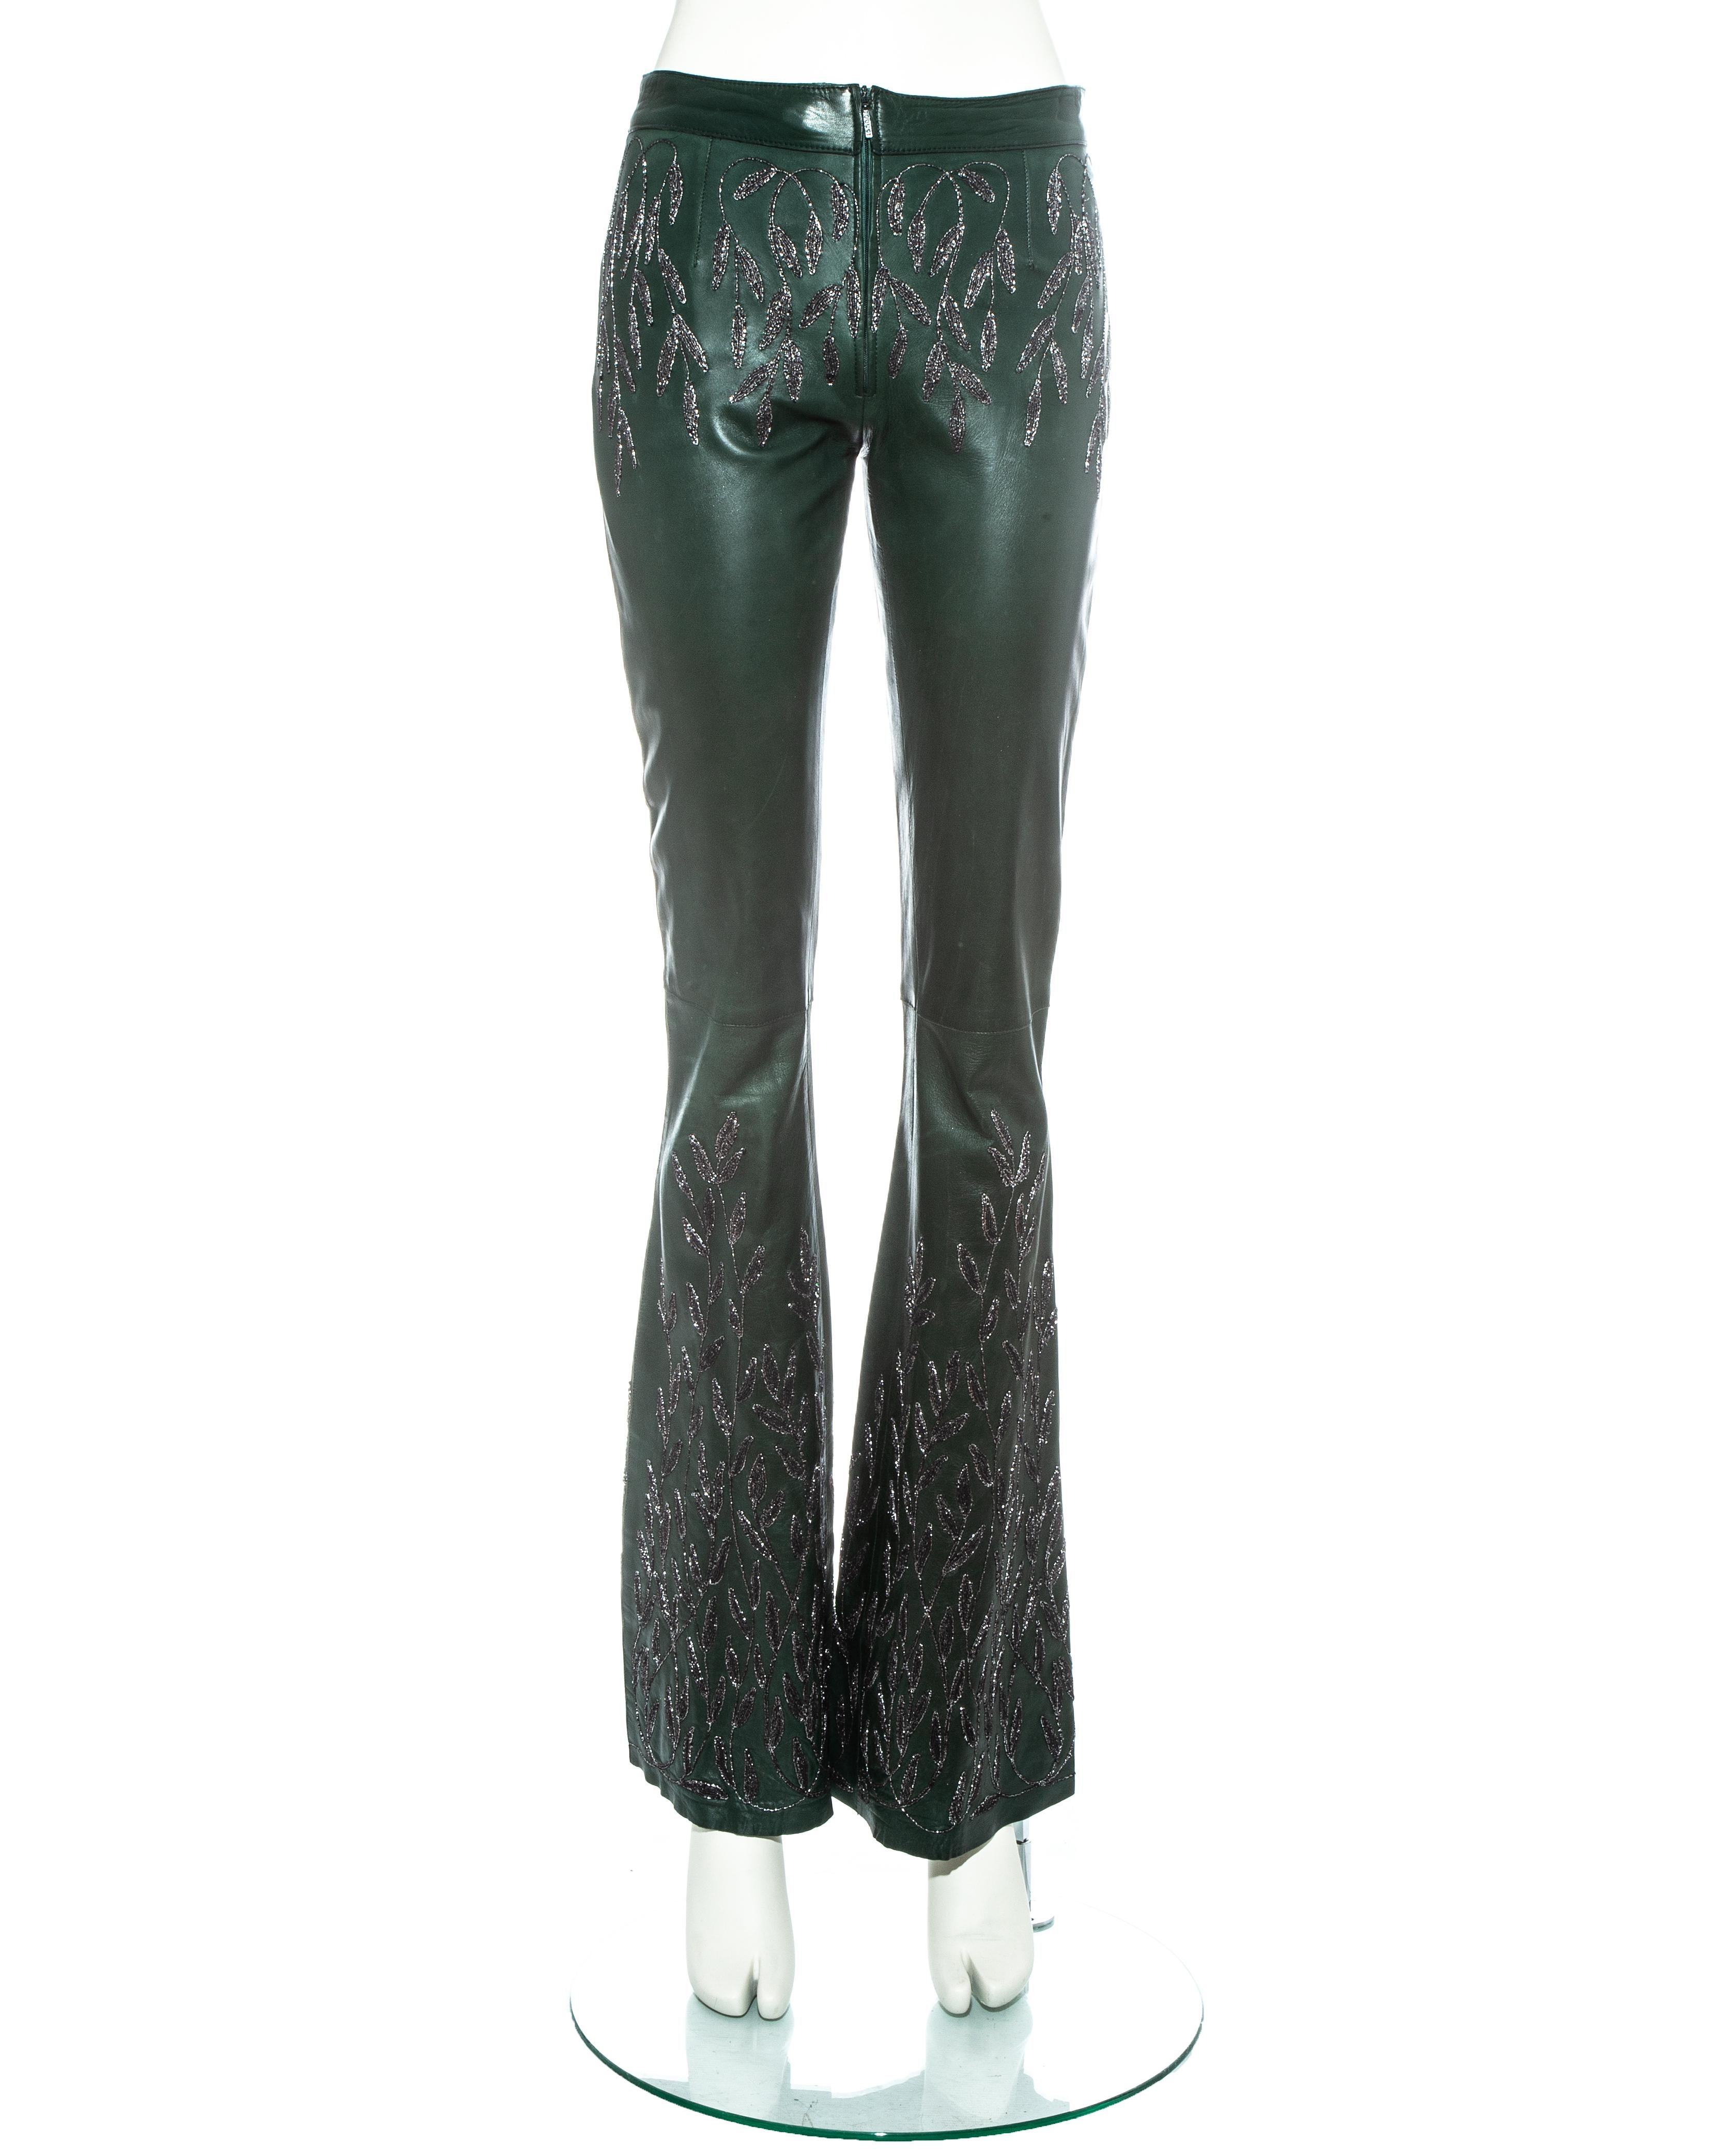 Gucci by Tom Ford green embroidered leather flared pants

Fall-Winter 1999